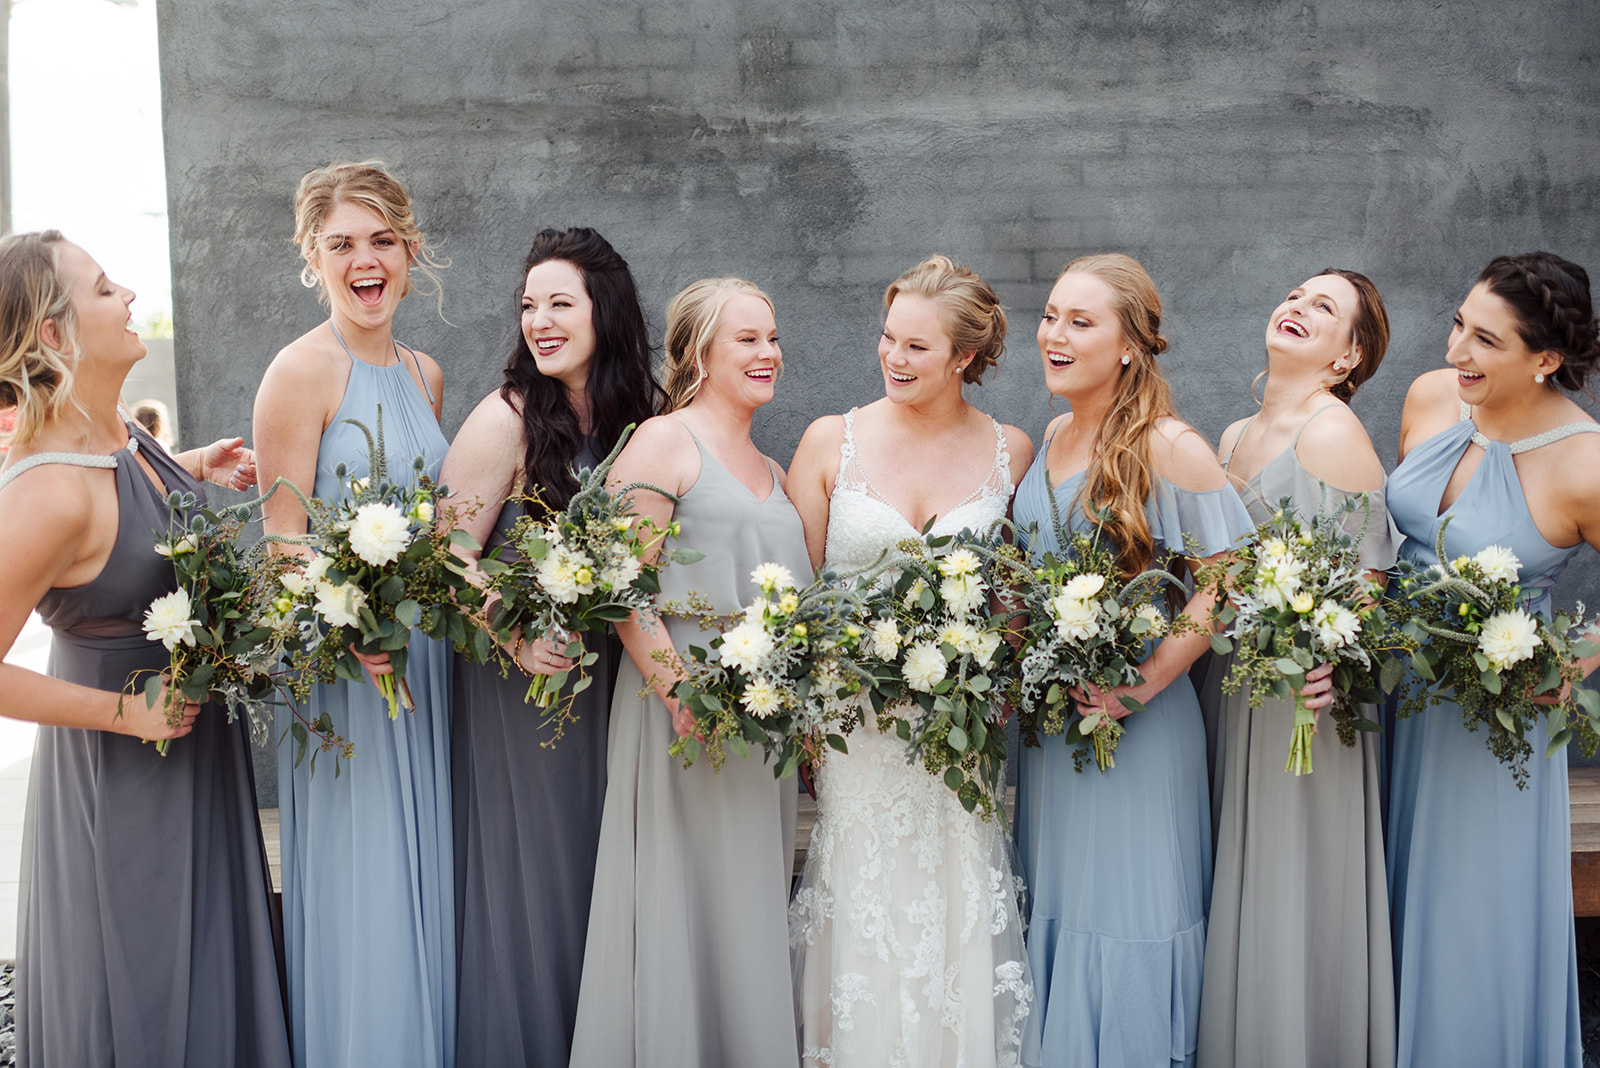 Mismatched blue and gray bridesmaid dresses: Nashville wedding at Clementine featured on Nashville Bride Guide